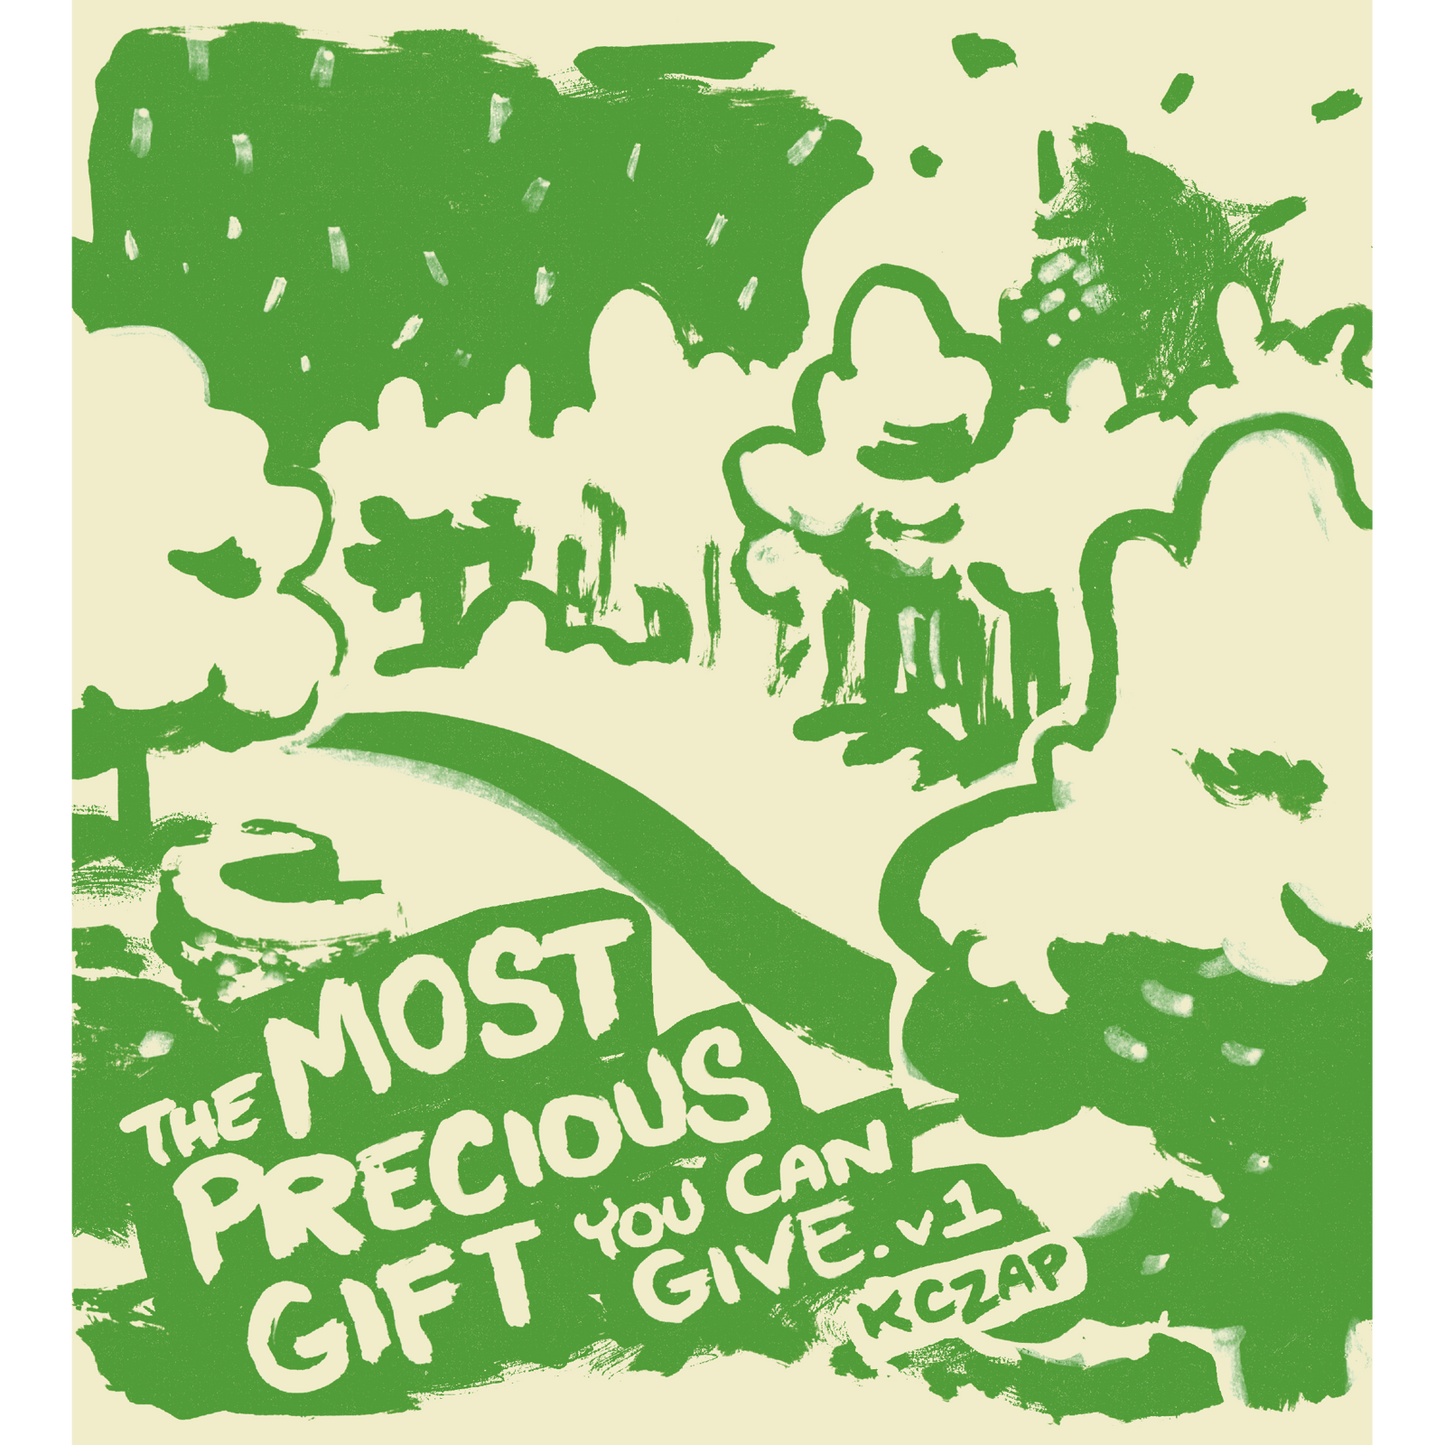 The Most Precious Gift You Can Give v1